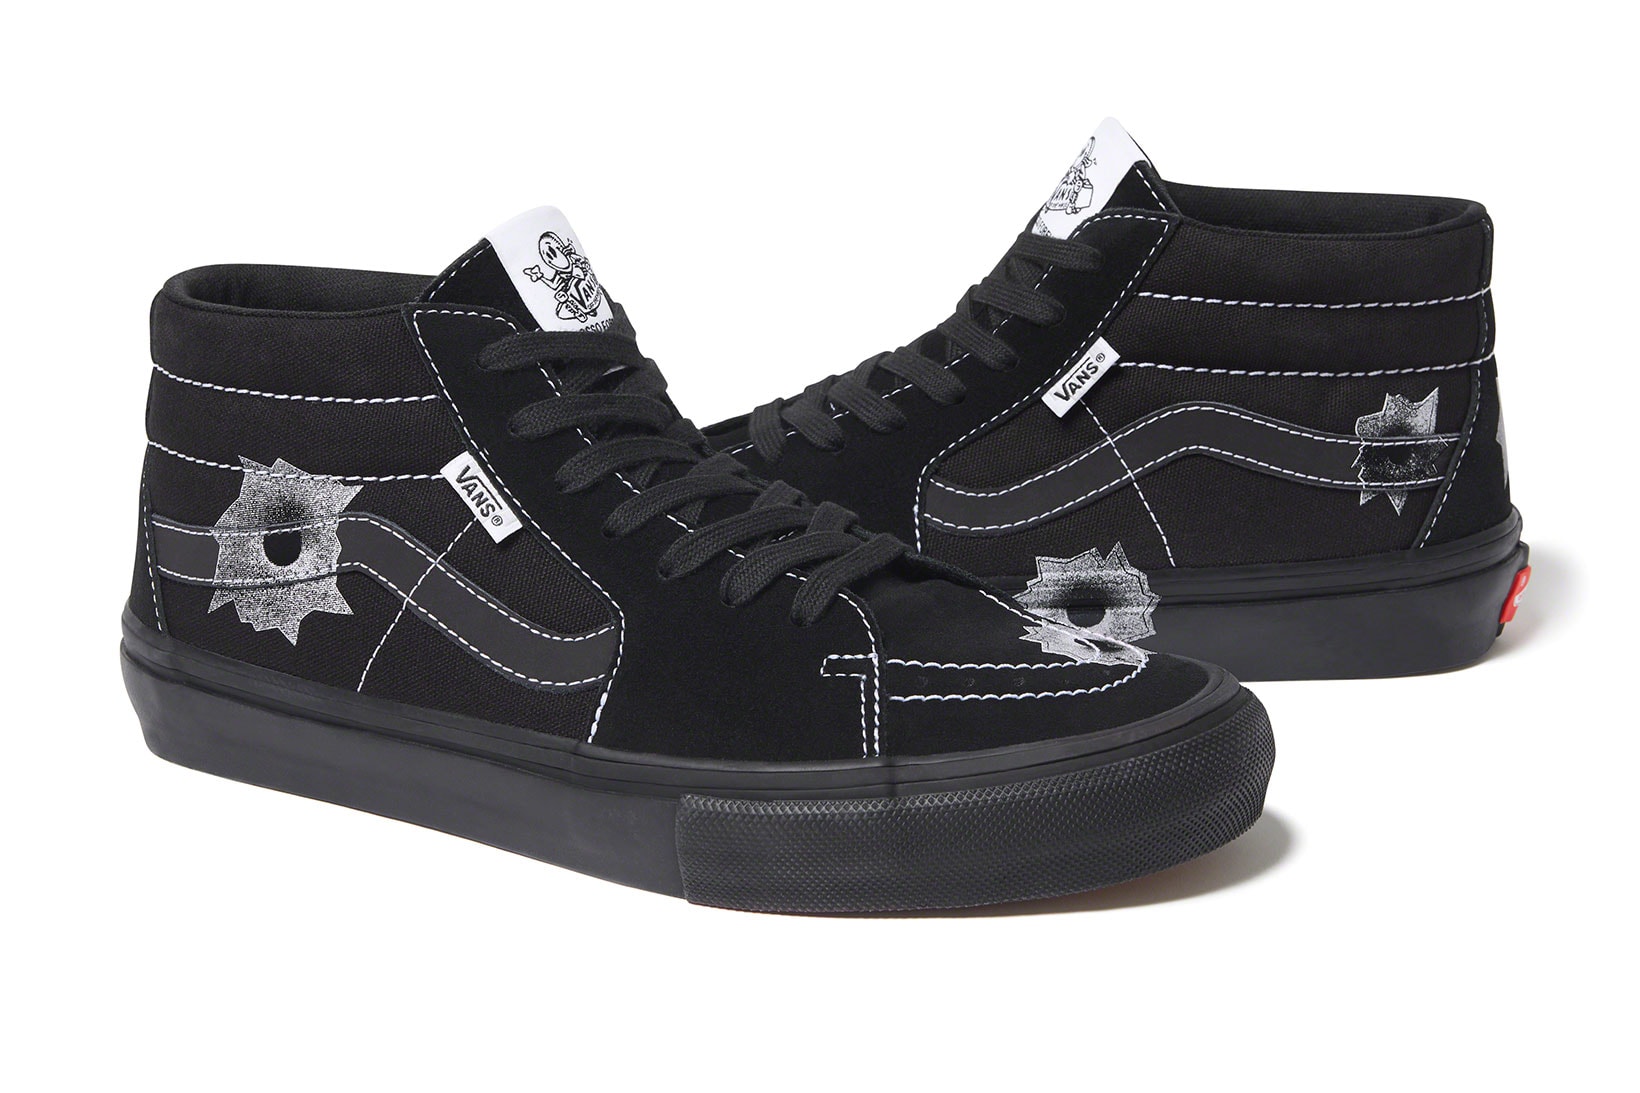 Supreme Vans Skate Grosso Mid Nate Lowman Collaboration Official Images Release Date